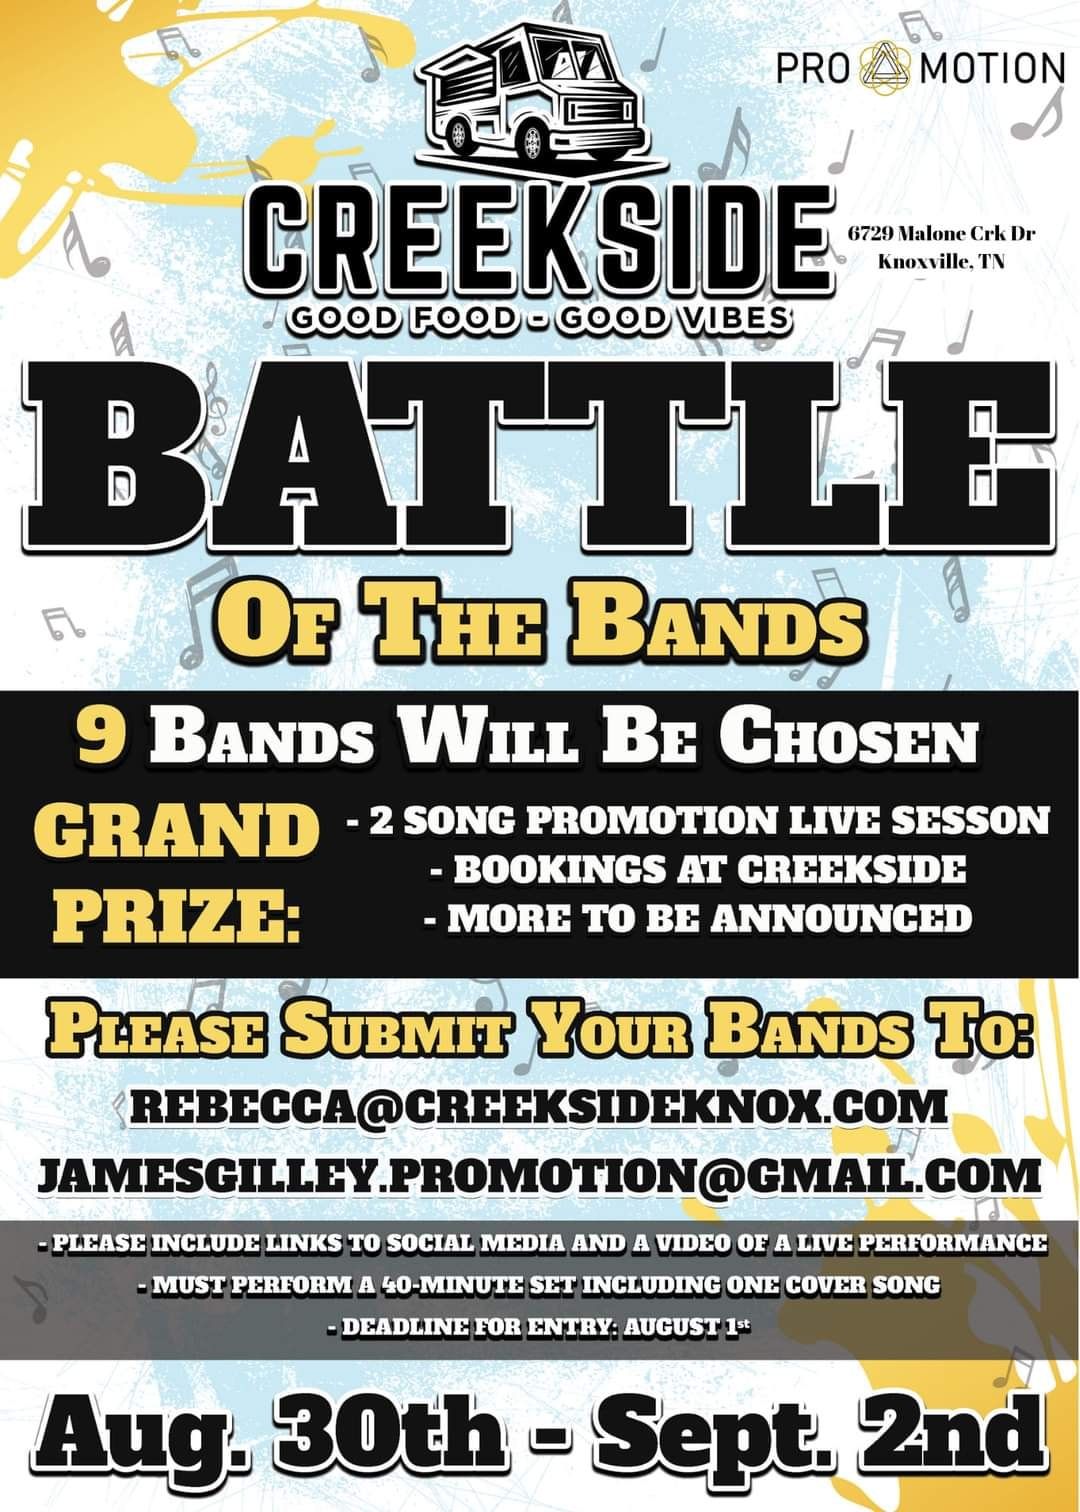 Battle Of The Bands